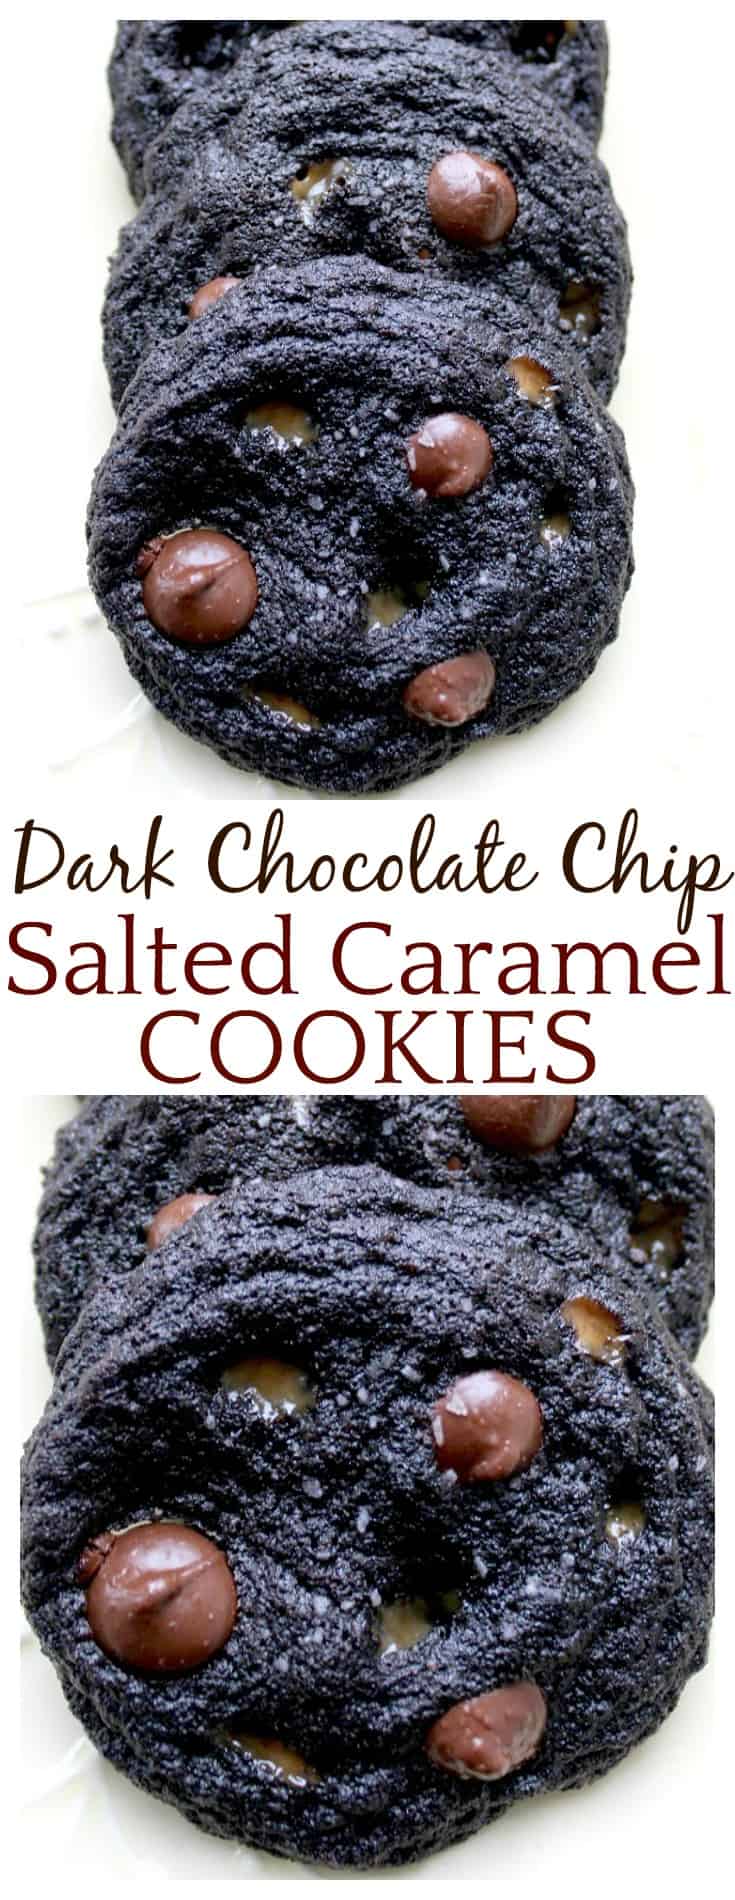 These Dark Chocolate Chip Salted Caramel Cookies are perfection! They are decadent with a chewy center and crispy edges! This cookie recipe combines chocolate with salted caramel...oh heck yes! Just delicious!